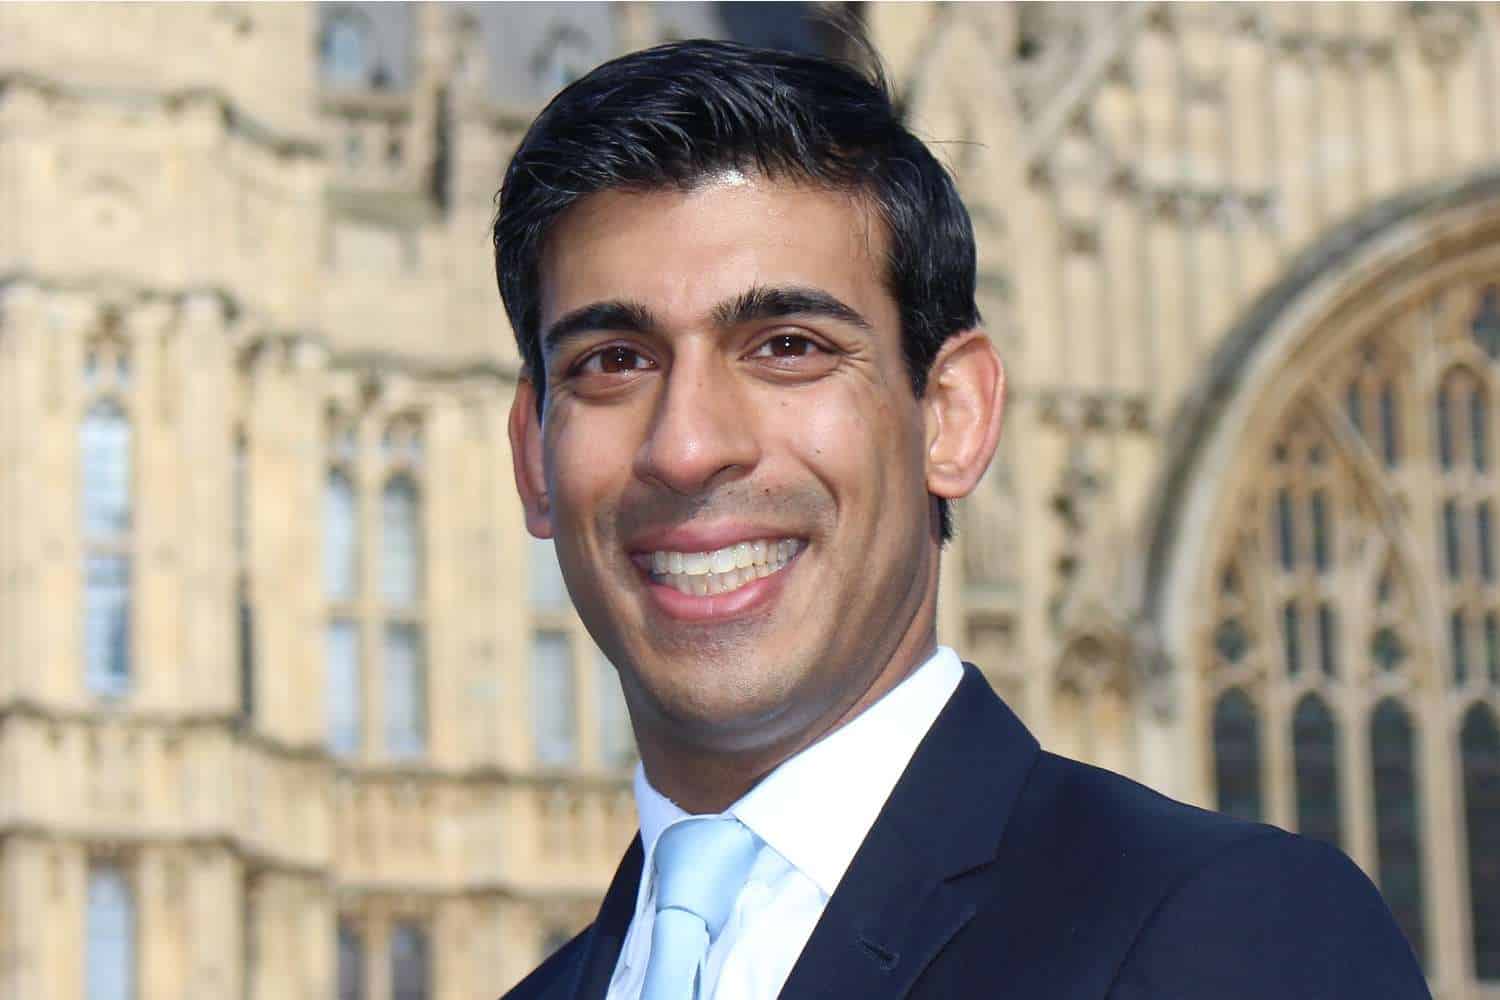 Rishi Sunak Five things to know about UK's new prime minister